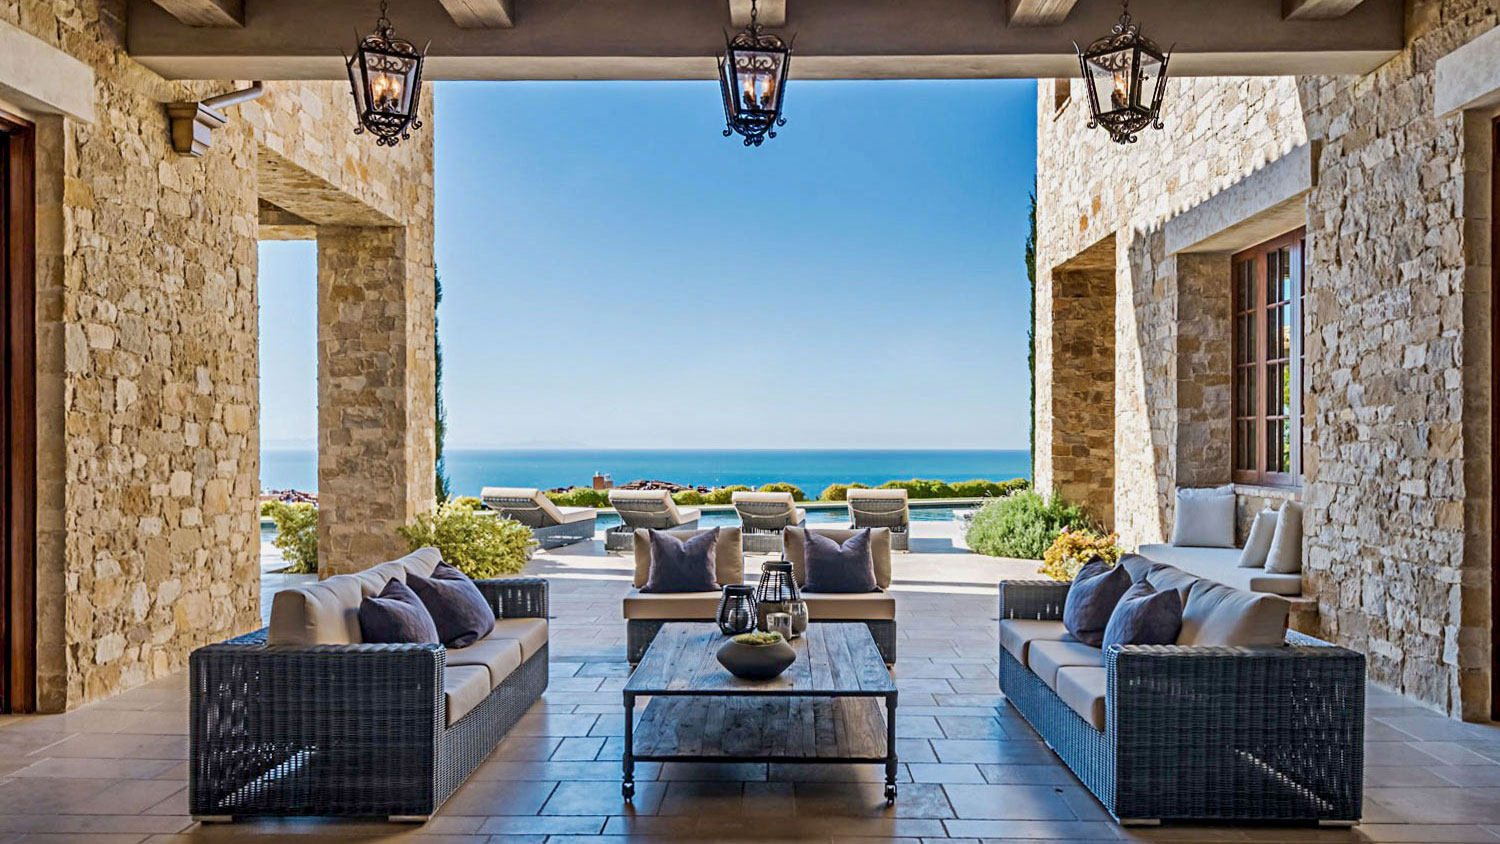 exterior seating area with ocean view Tuscan Blend Rubble thin veneer installed on exterior walls